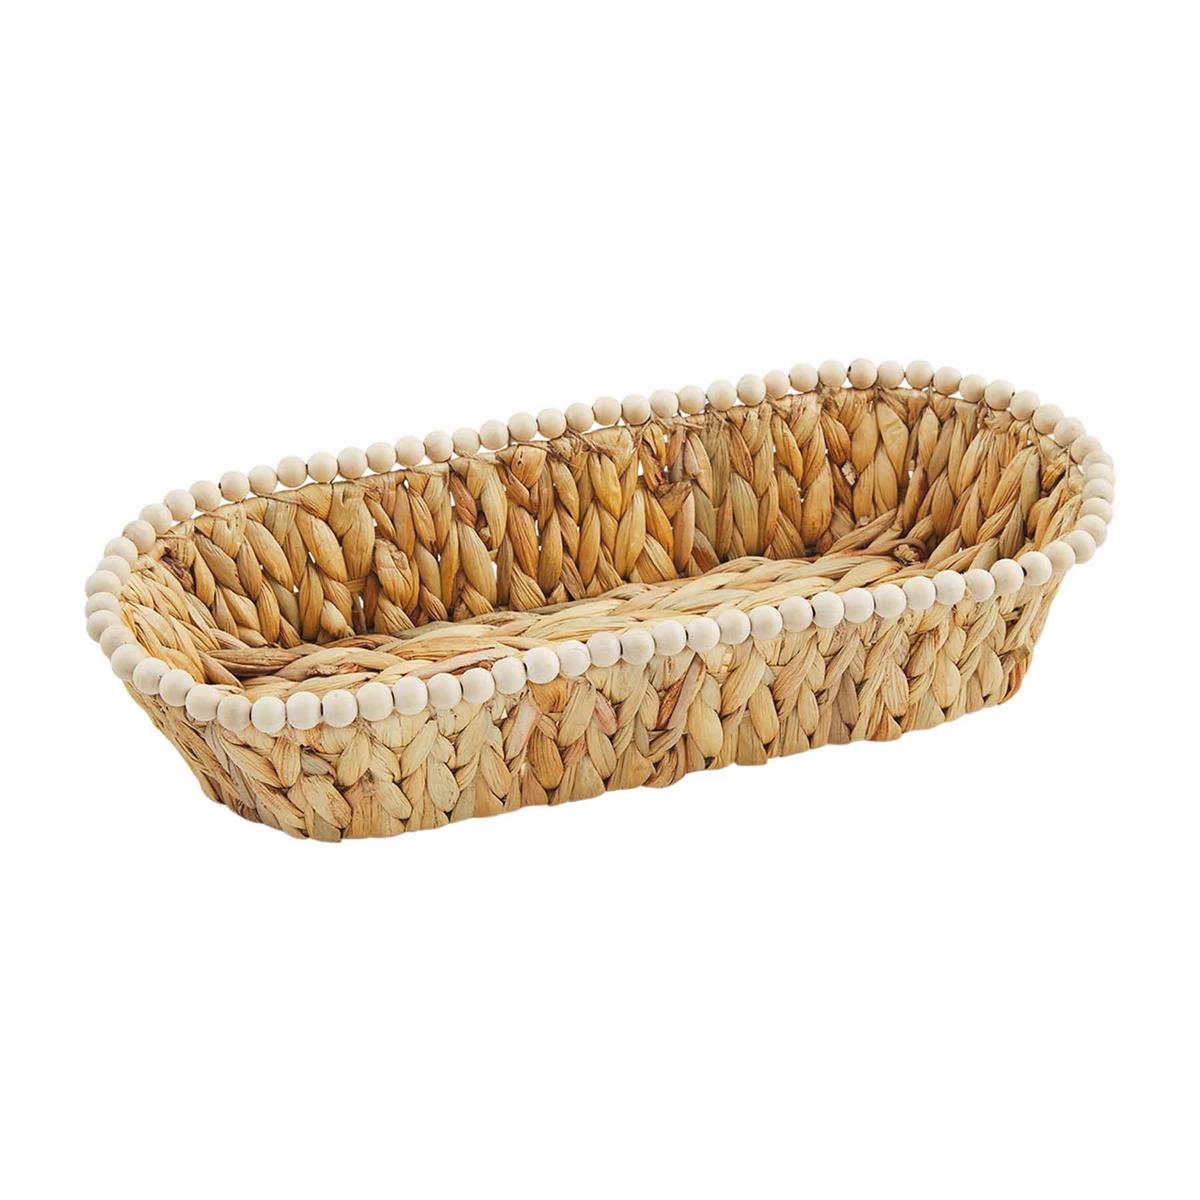 large hyacinth beaded bread basket on a white background